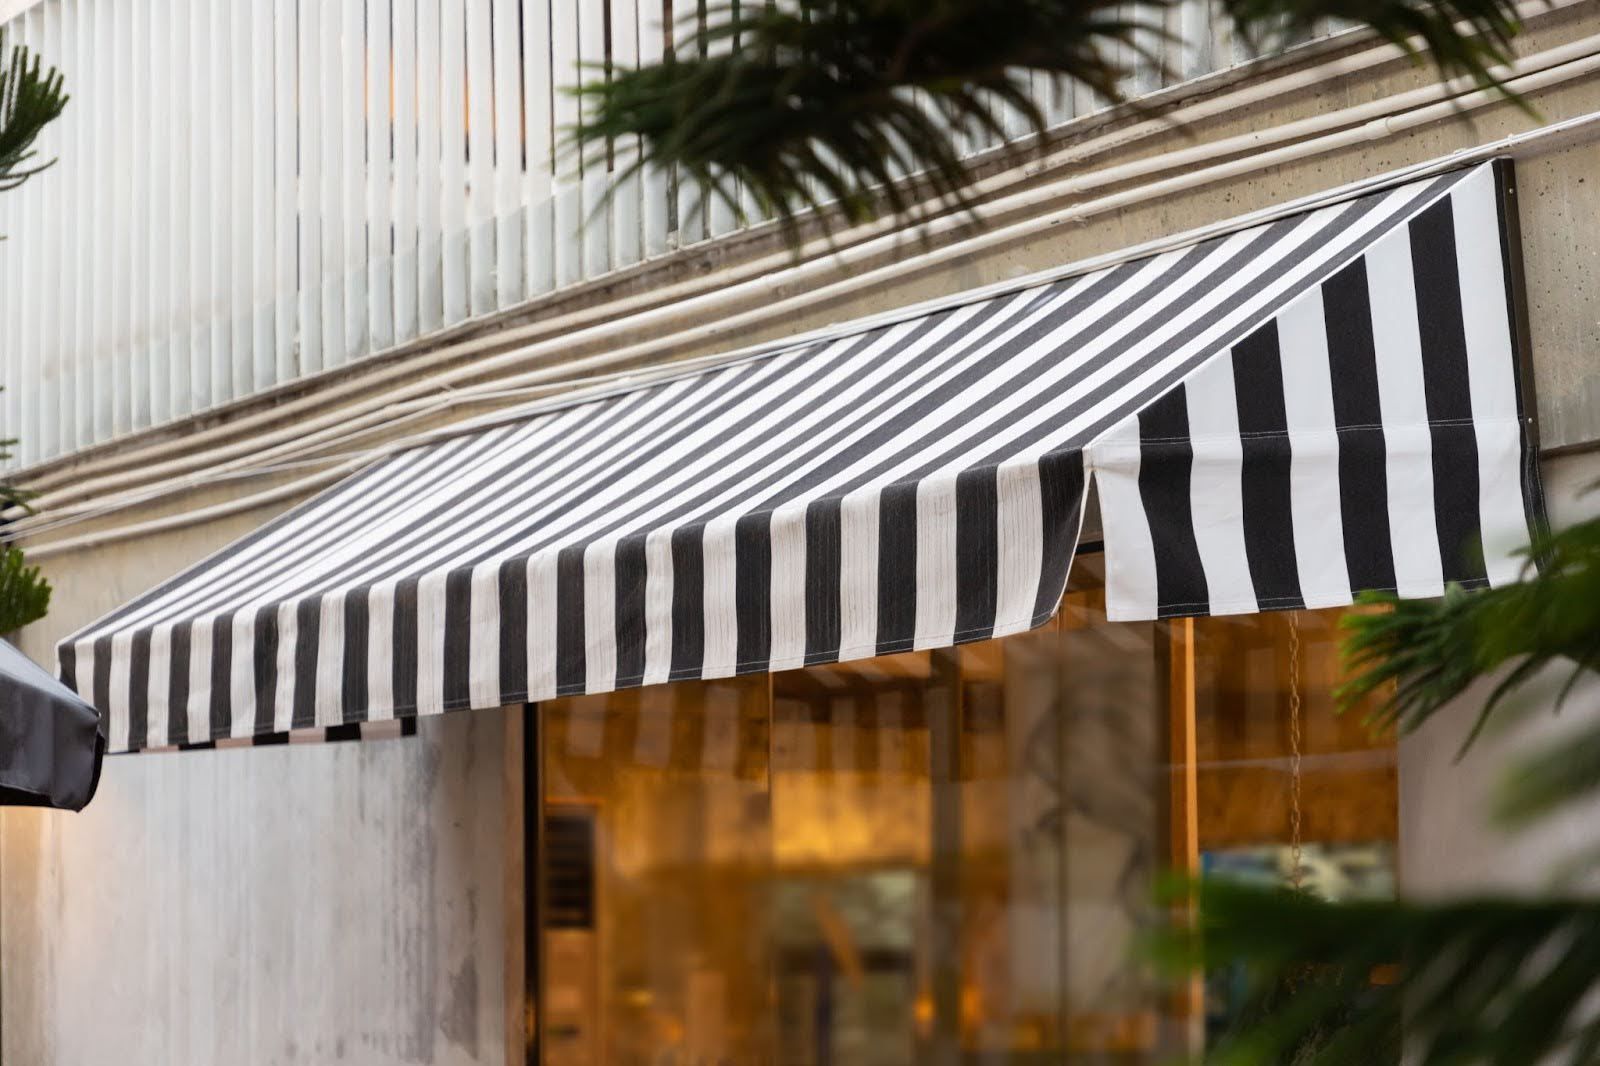 Awning Design Ideas To Improve Your Local Business